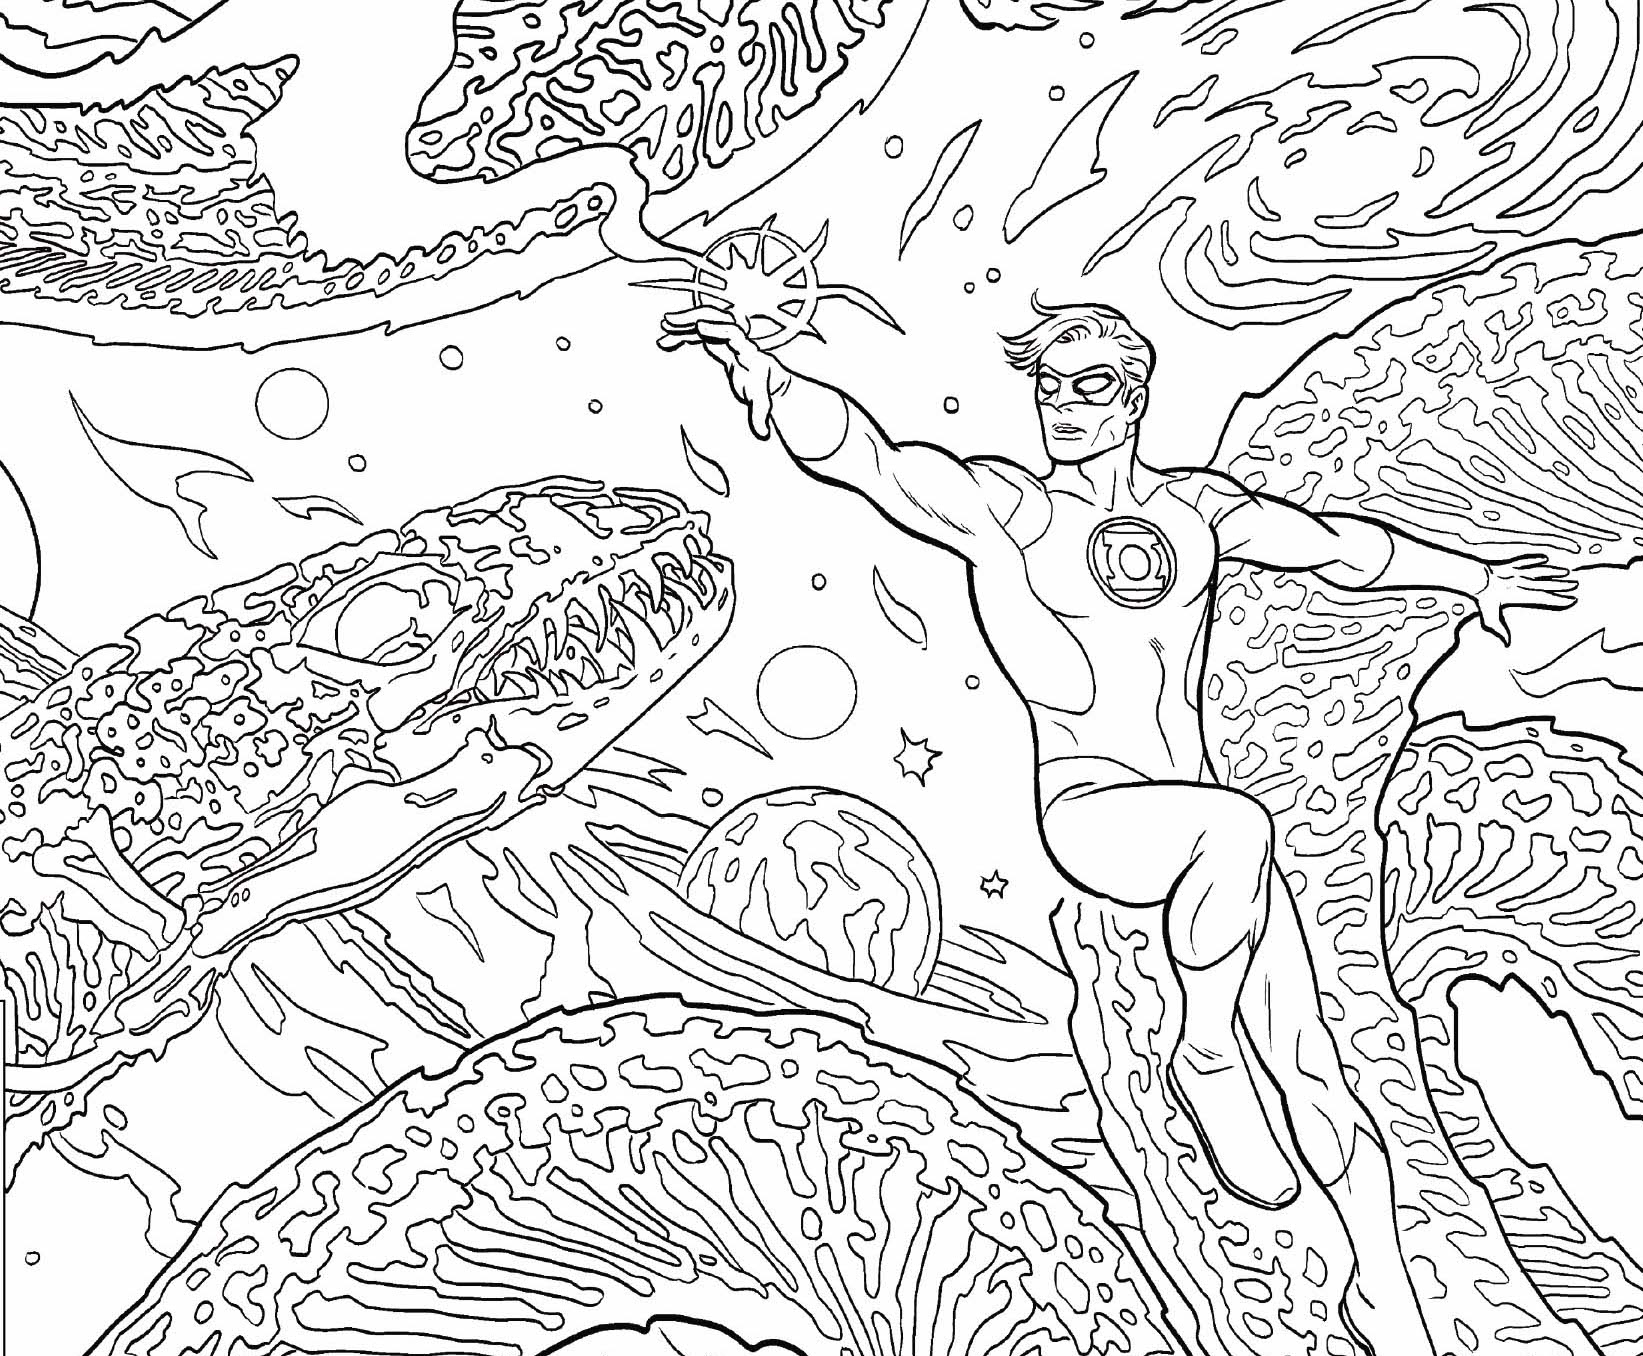 Download DC Preview: Adult Coloring Book Covers | AIPT